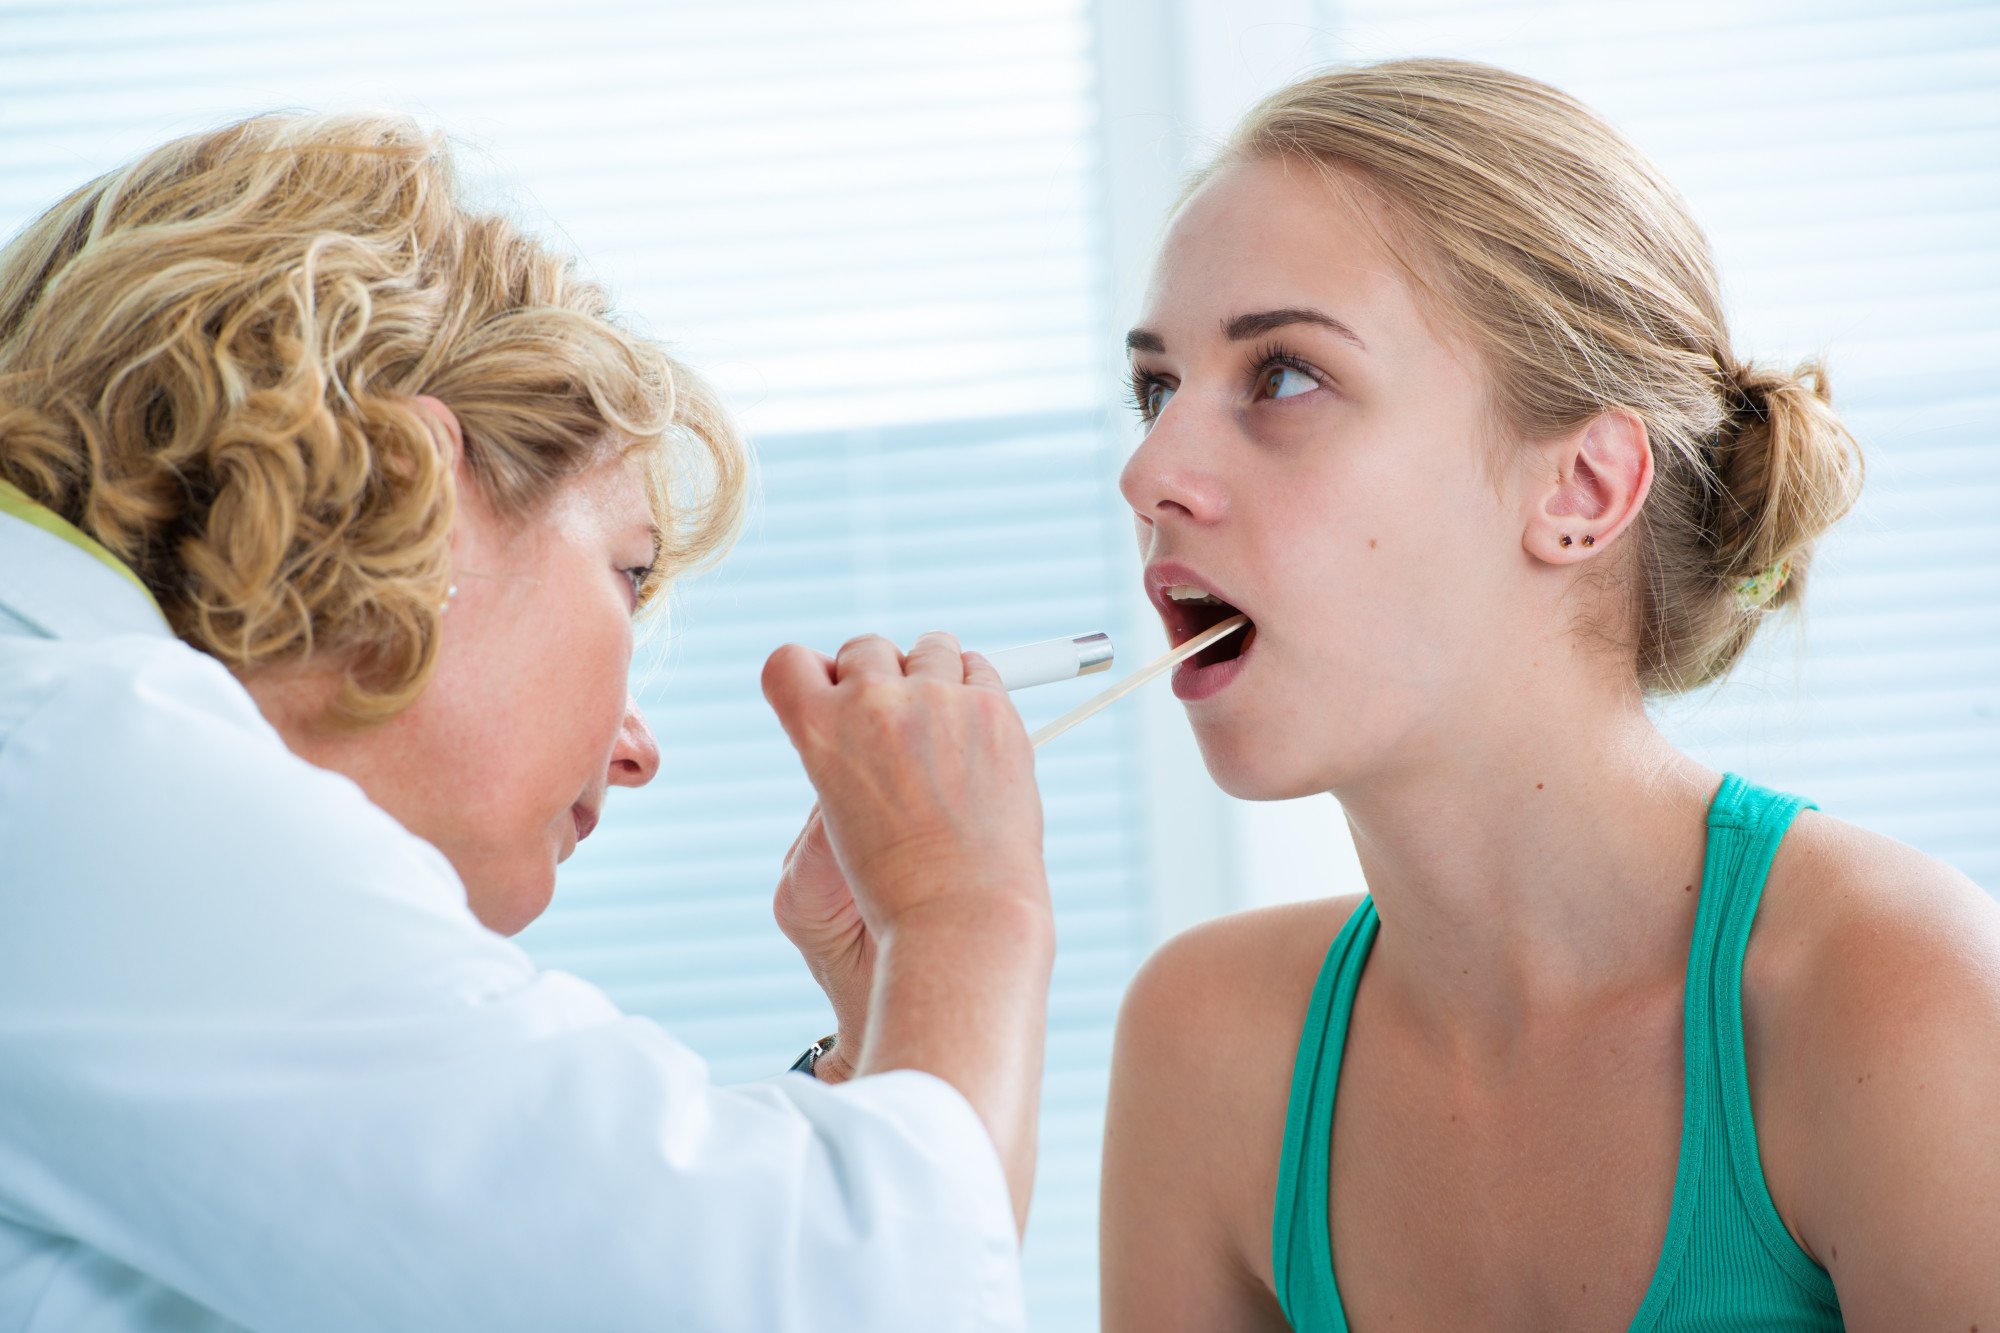 You may be wondering, does Bactrim treat strep throat? Learn what you need to know about Bactrim and strep throat in this article.